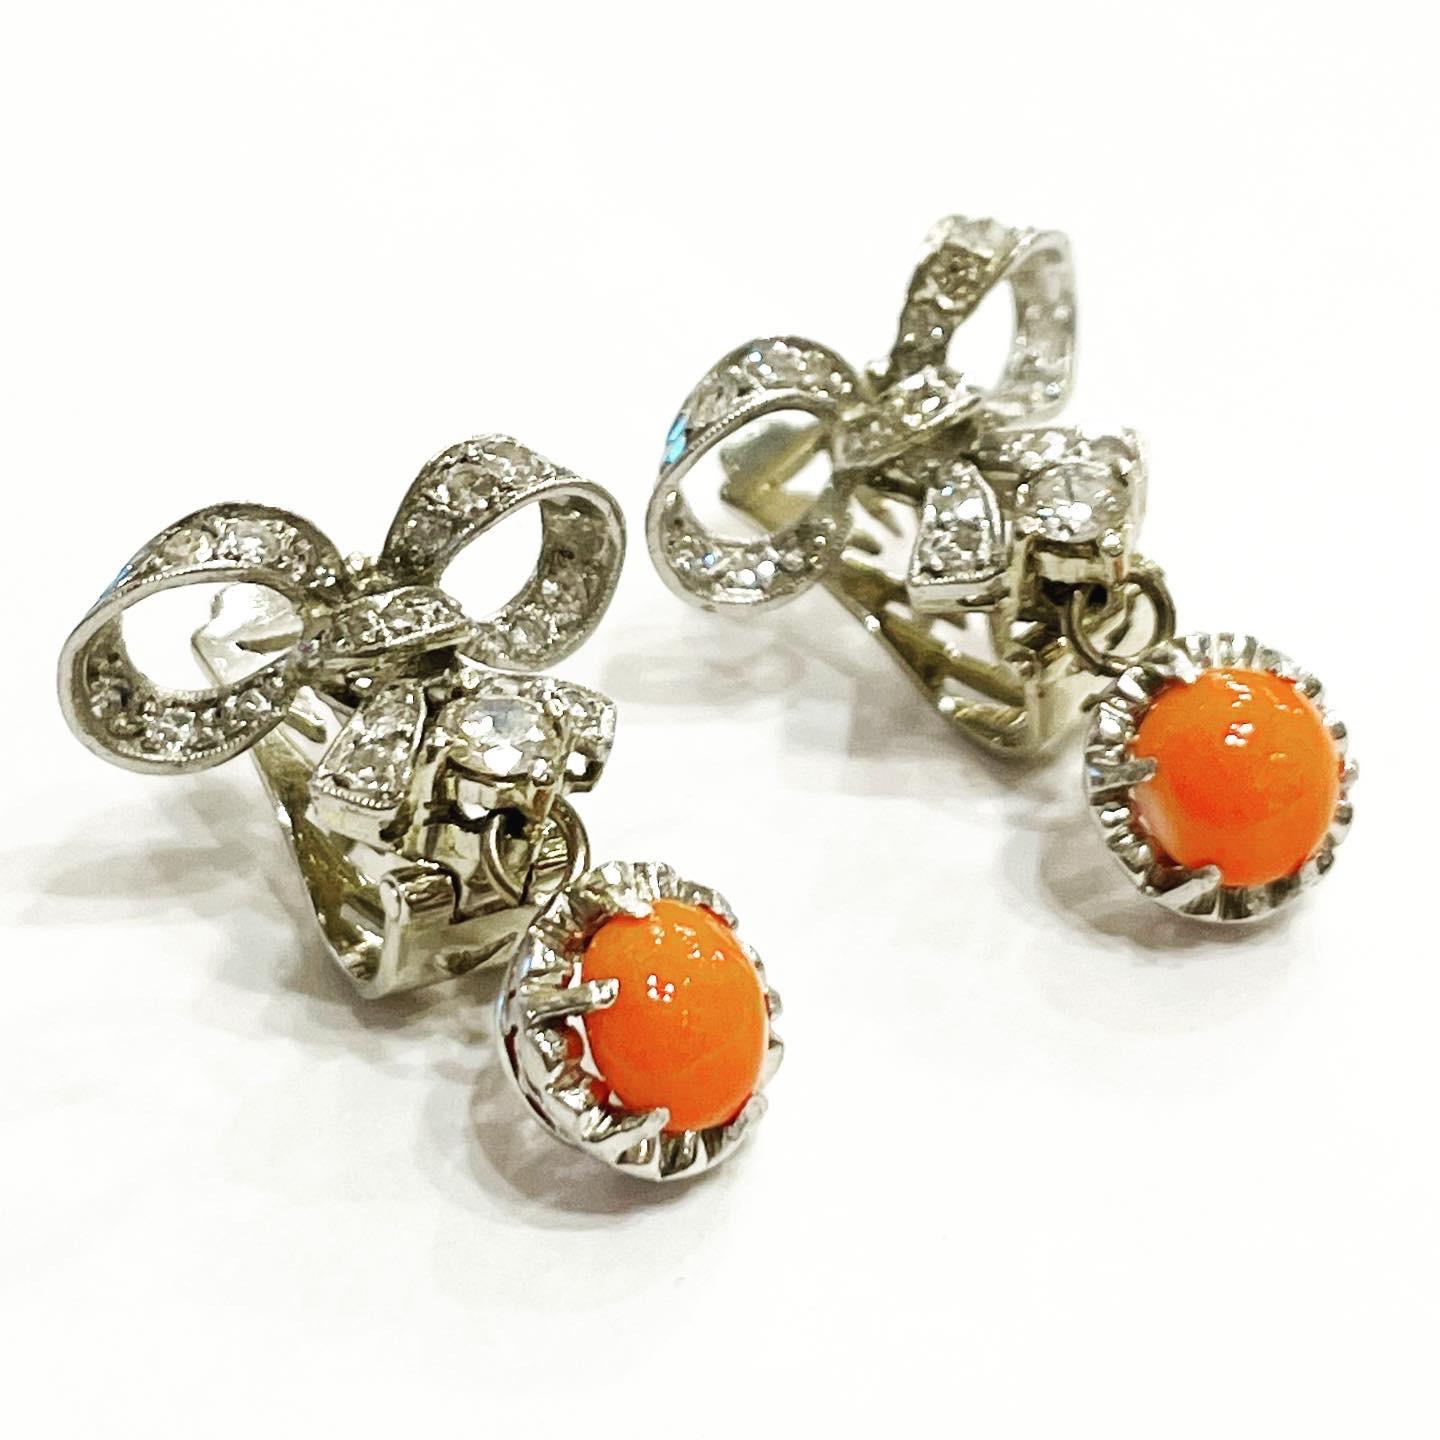 1930s earrings with a round dropping coral in cabochon cut and diamonds.
Clip-on drop system.
The earrings are finely crafted in platinum with two beautiful coral cabochon, with diamonds.
Total approximate weight of the diamonds: 0.8 carat.
Total